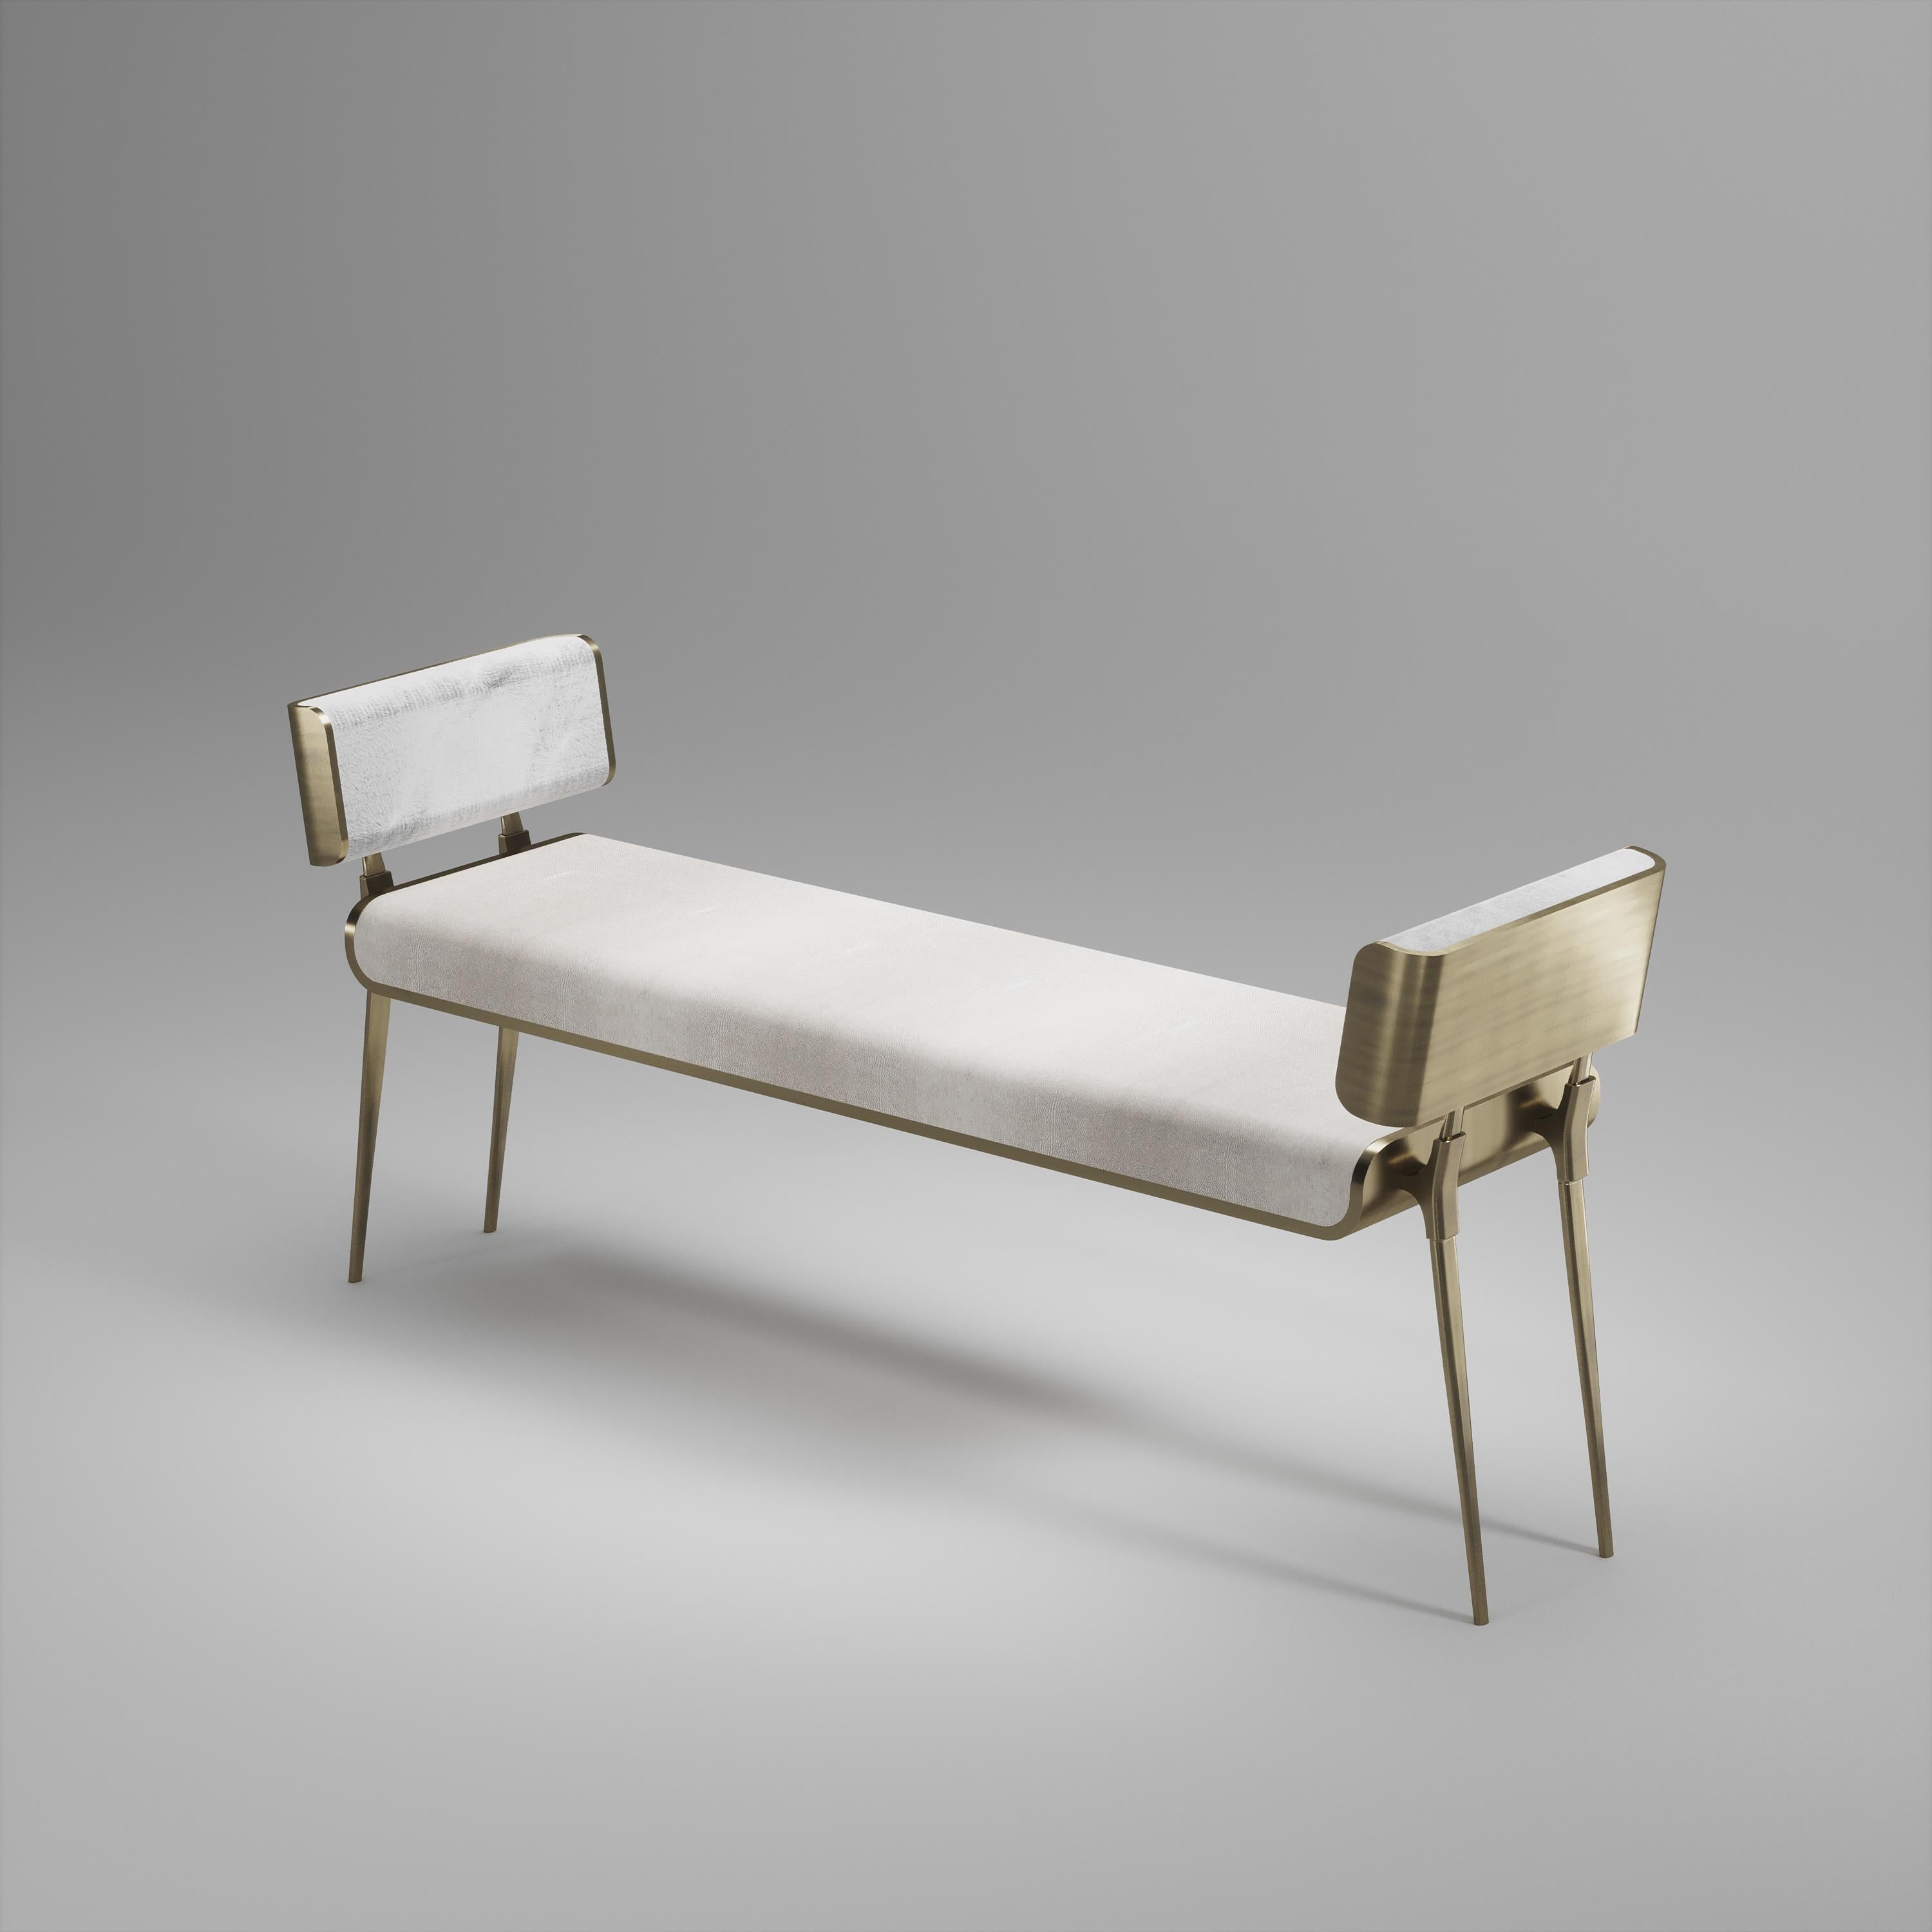 Inspired by the original Dandy Bench by Kifu Paris (see images at end of slide), the Dandy II Entrance Bench is the ultimate luxury seating. The seating area is inlaid in cream shagreen and the frame, legs and sides of the bench are completely